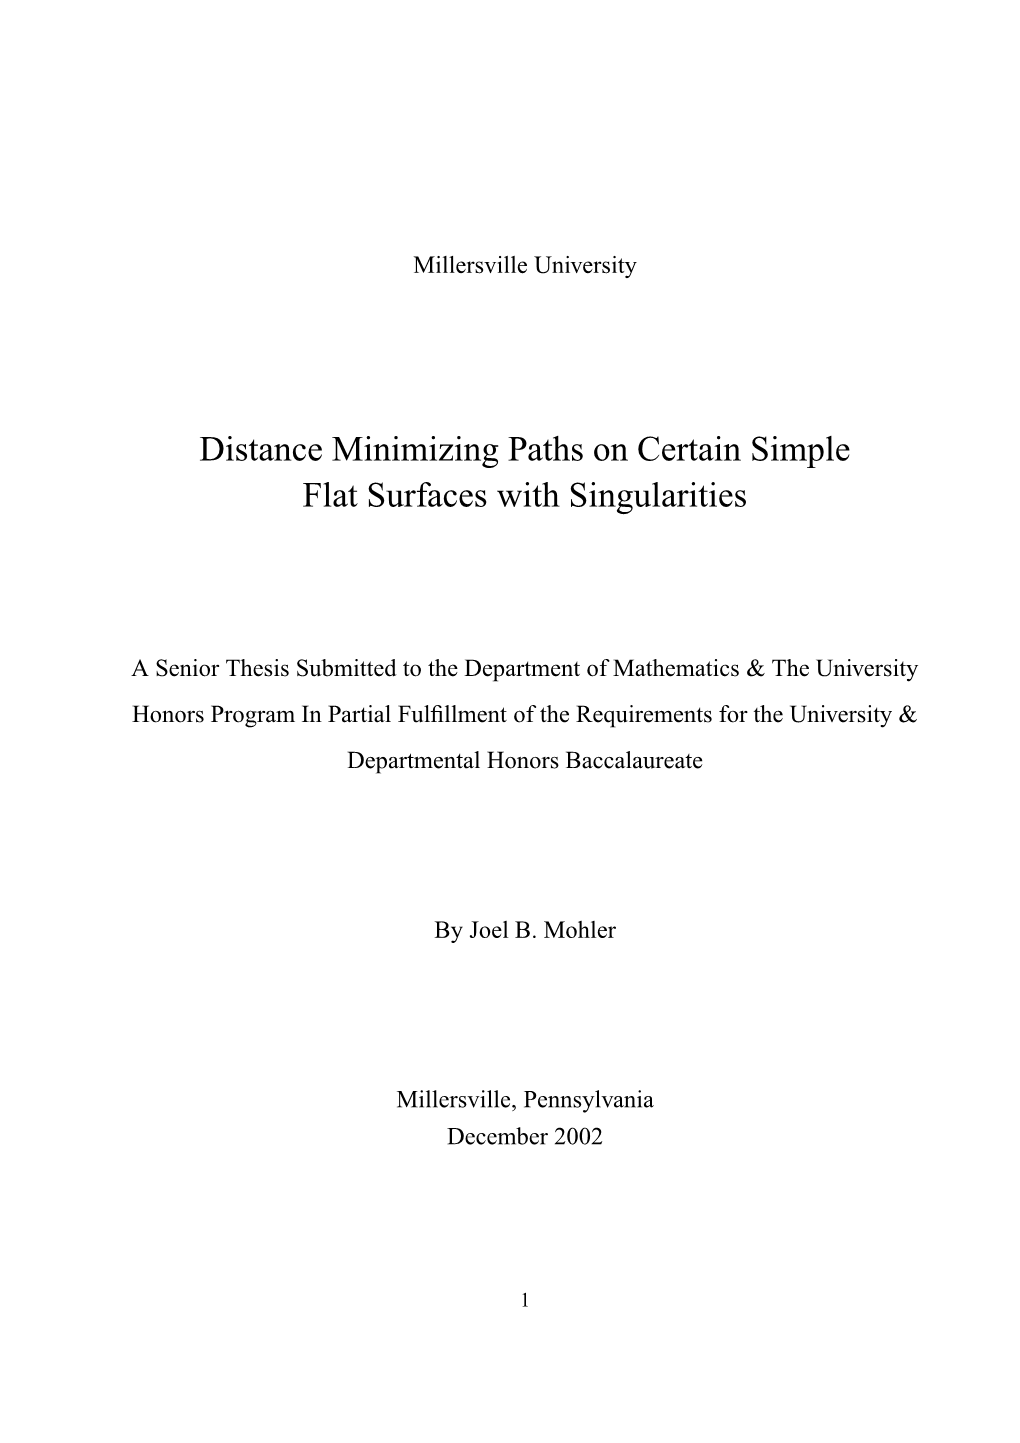 Distance Minimizing Paths on Certain Simple Flat Surfaces with Singularities